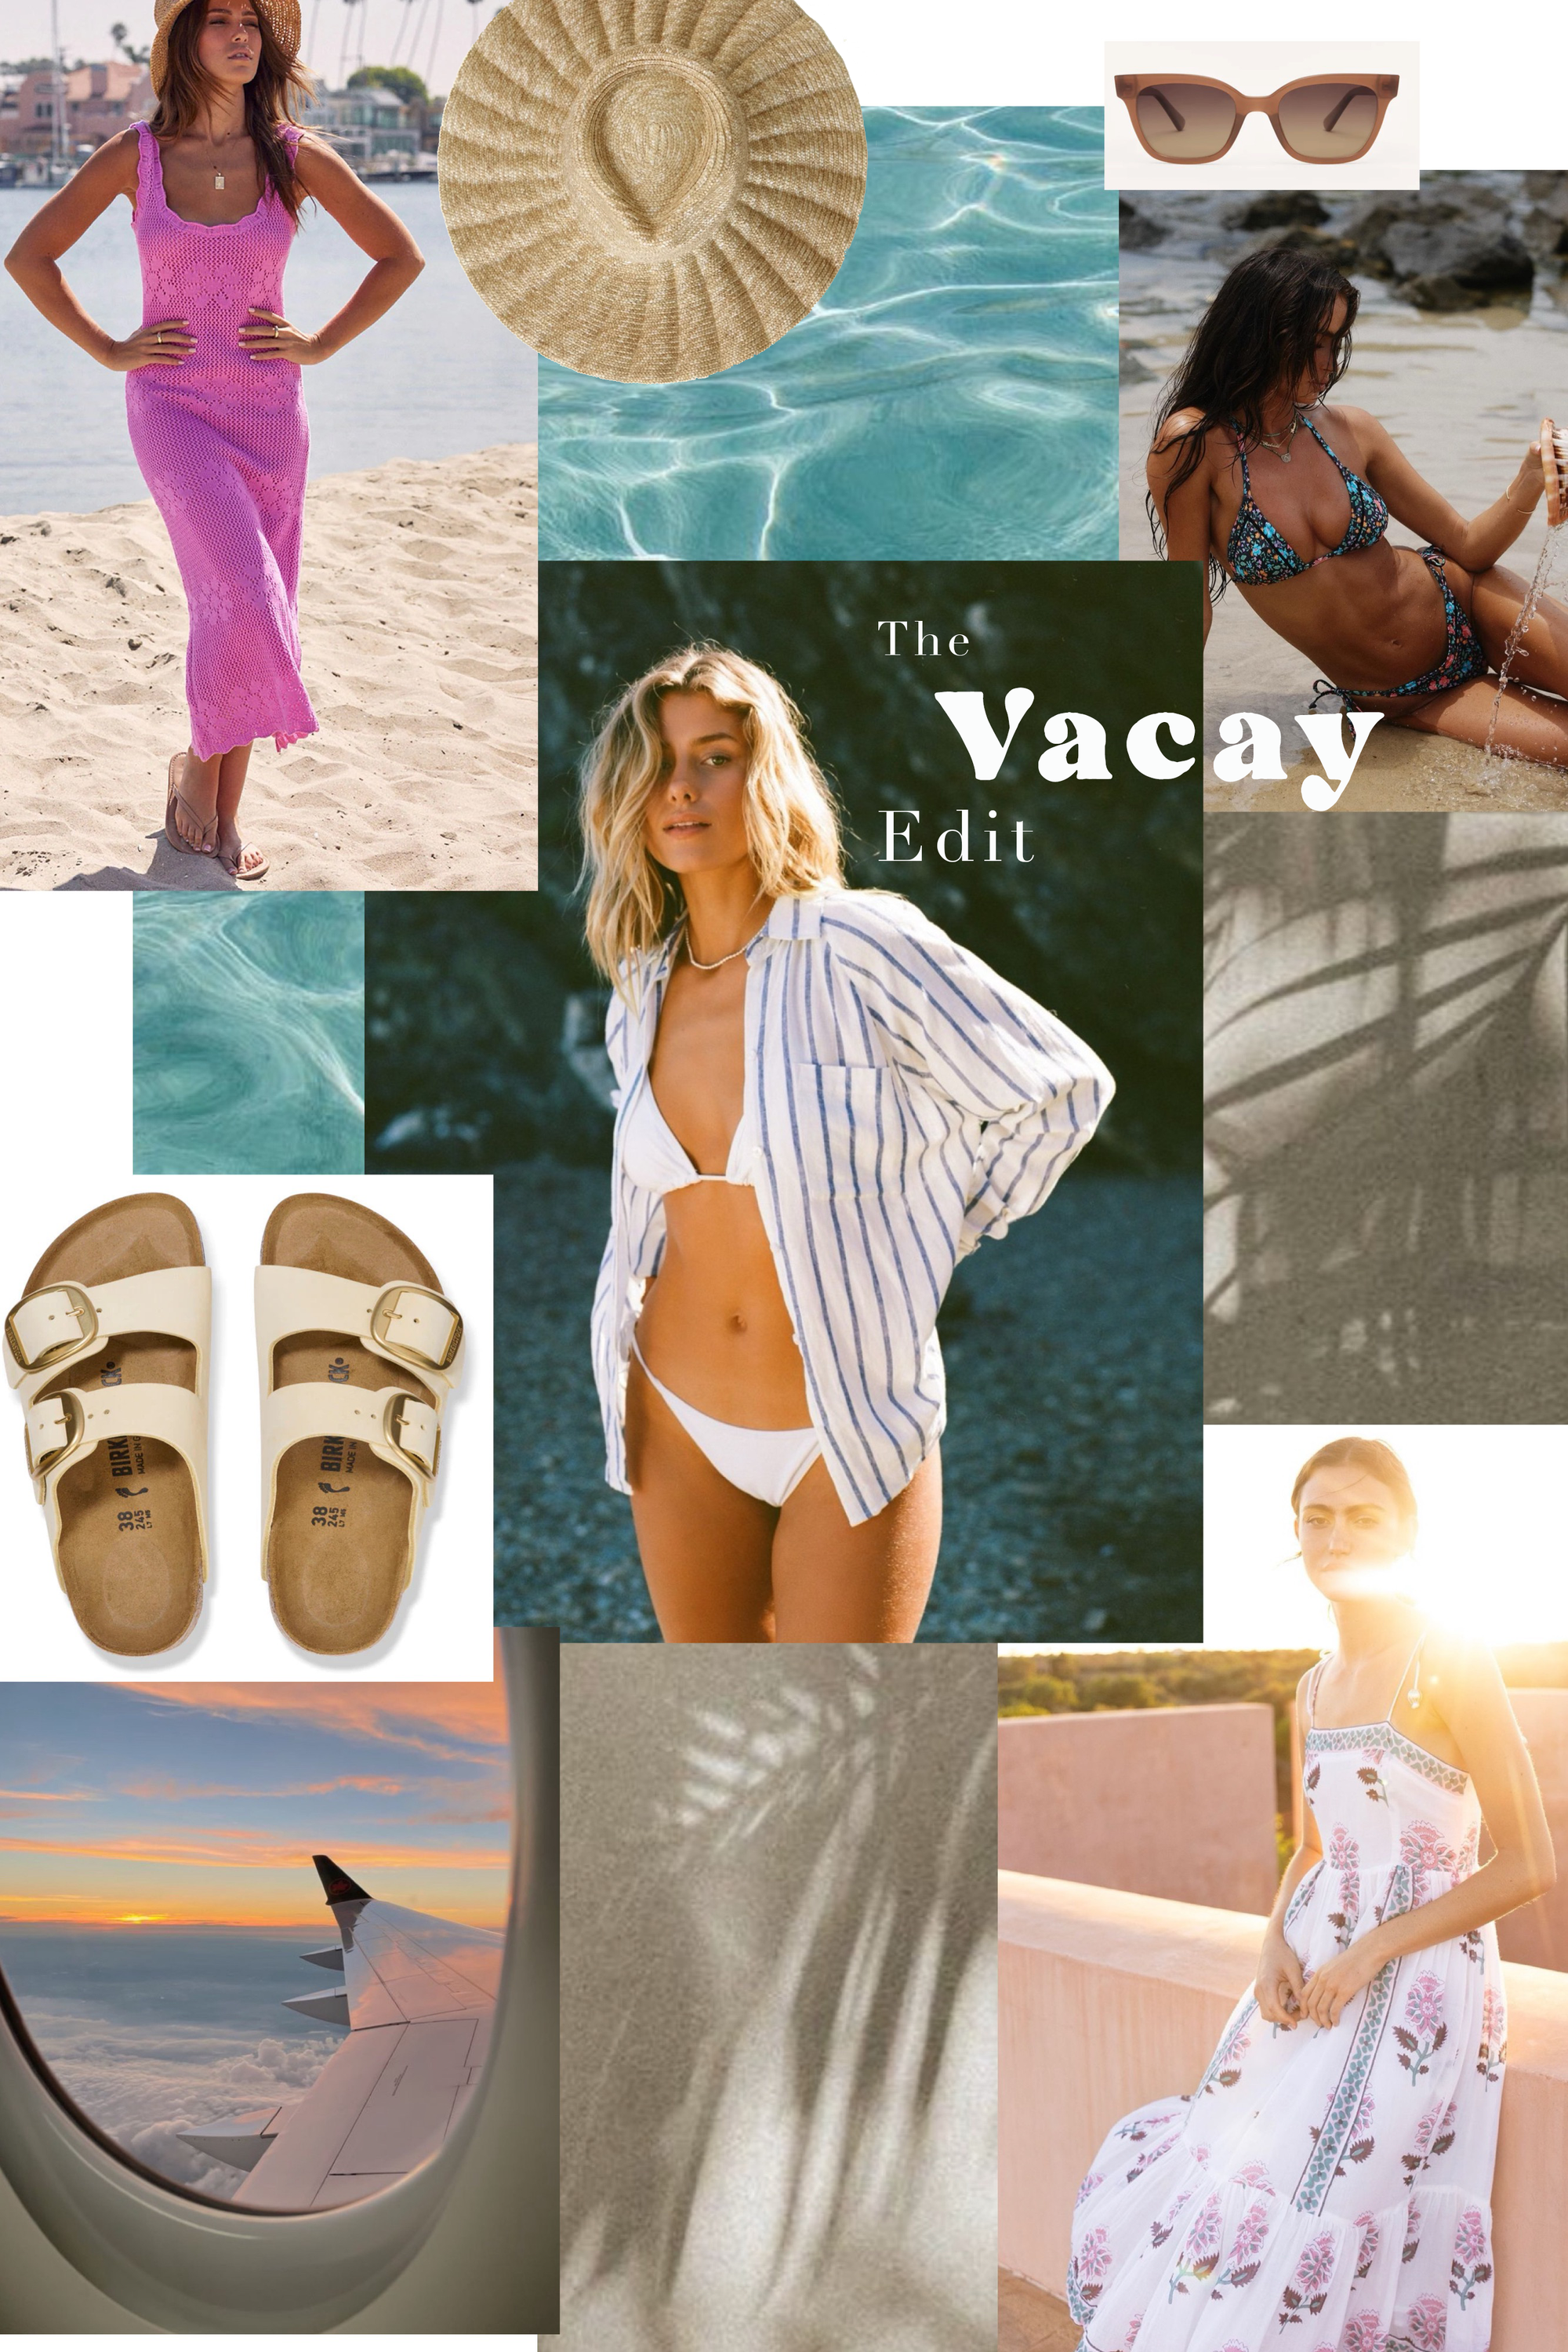 The vacay edit - shop all the newest arrivals for your next tropical getaway at waterlilyshop.com